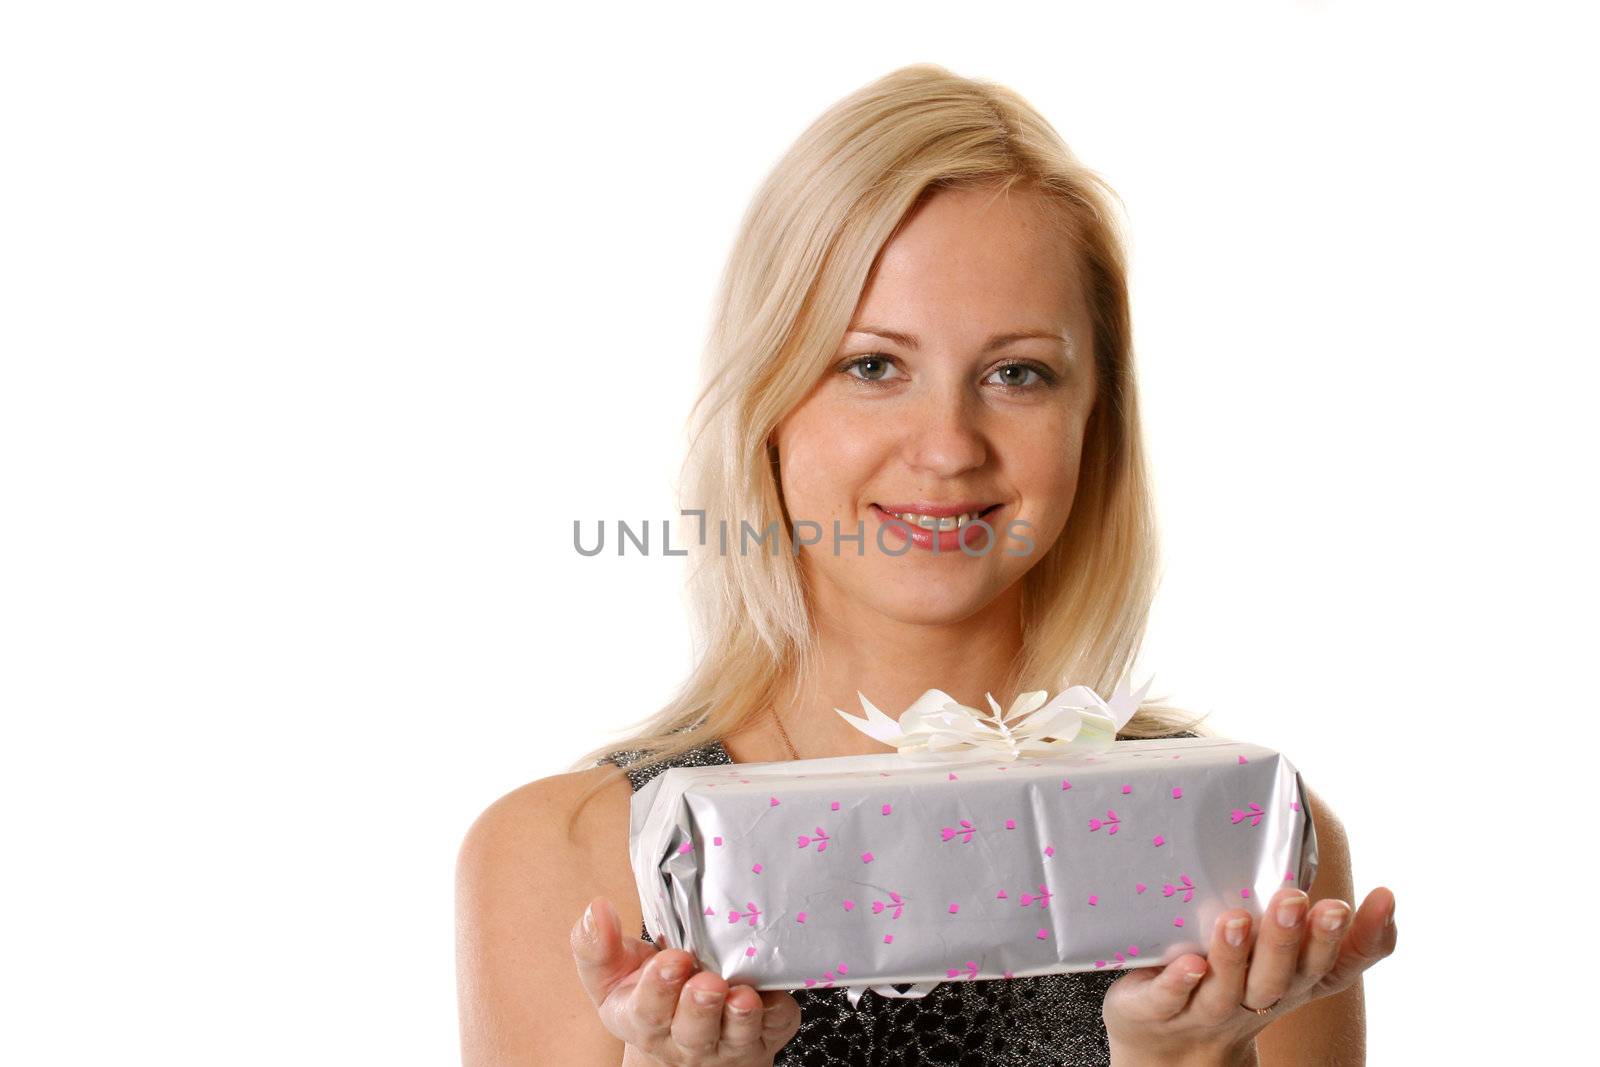 The young woman holds a gift before itself